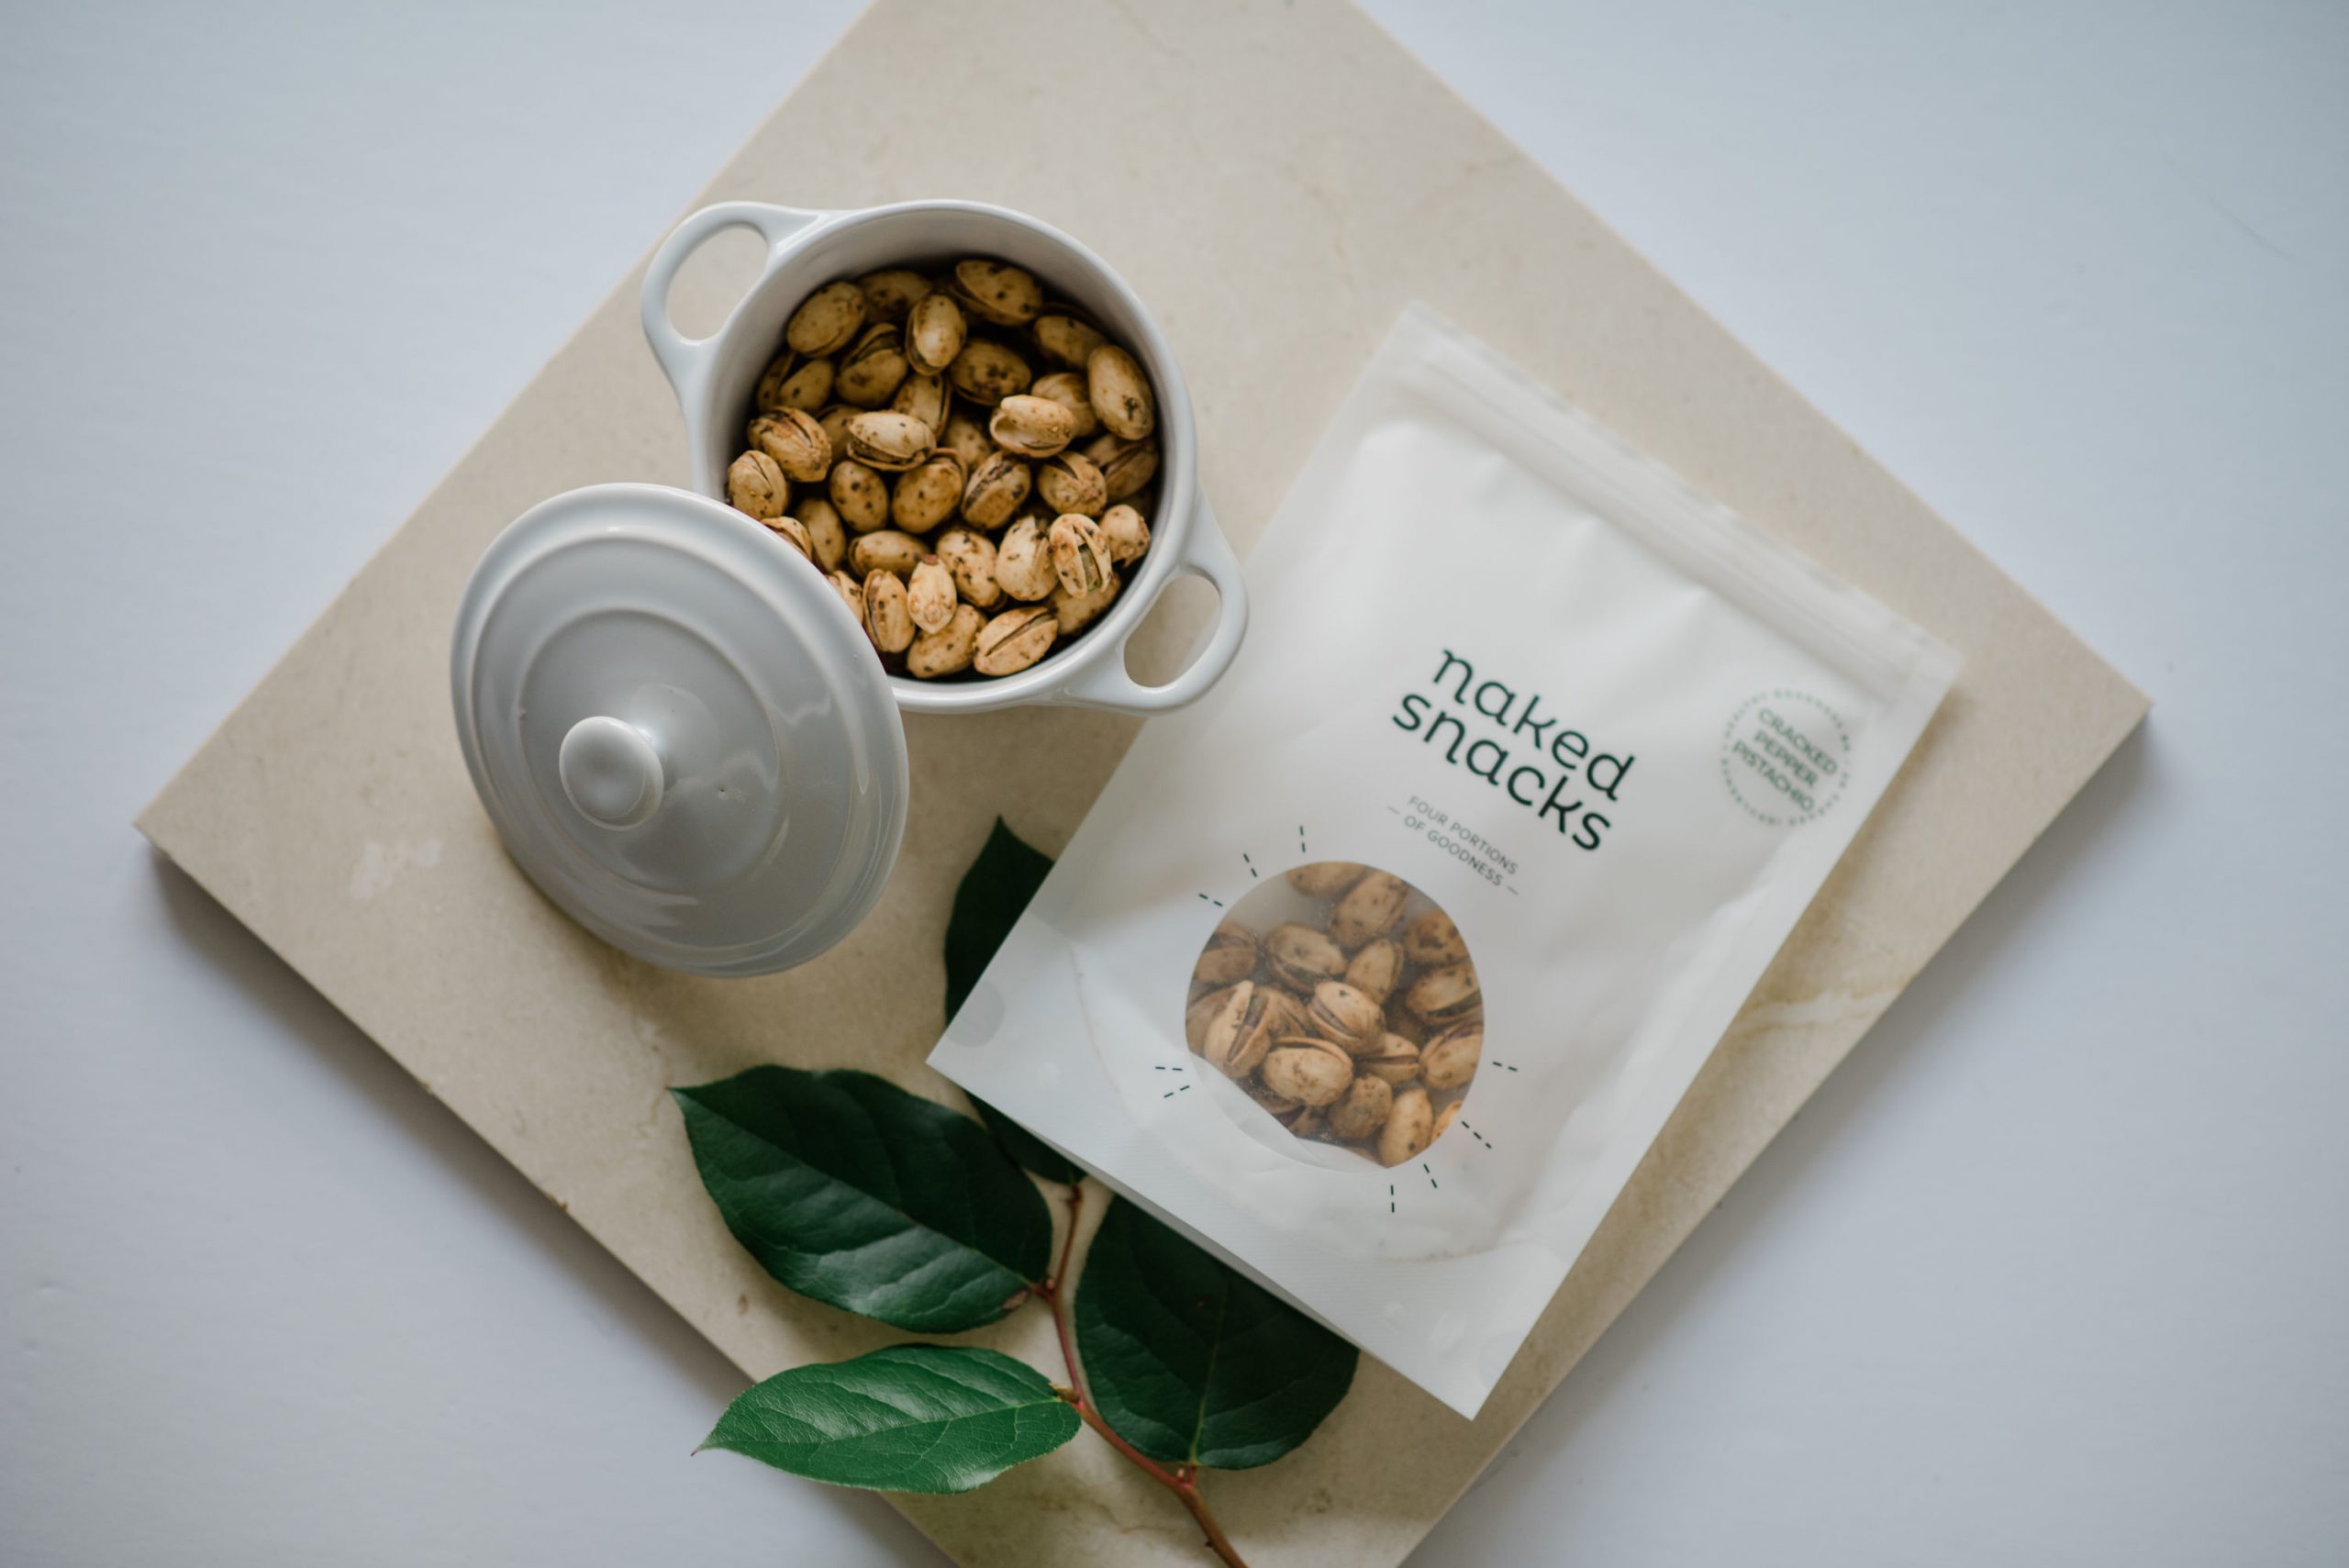 a bag of cracked pepper pistachio snacks from naked snacks